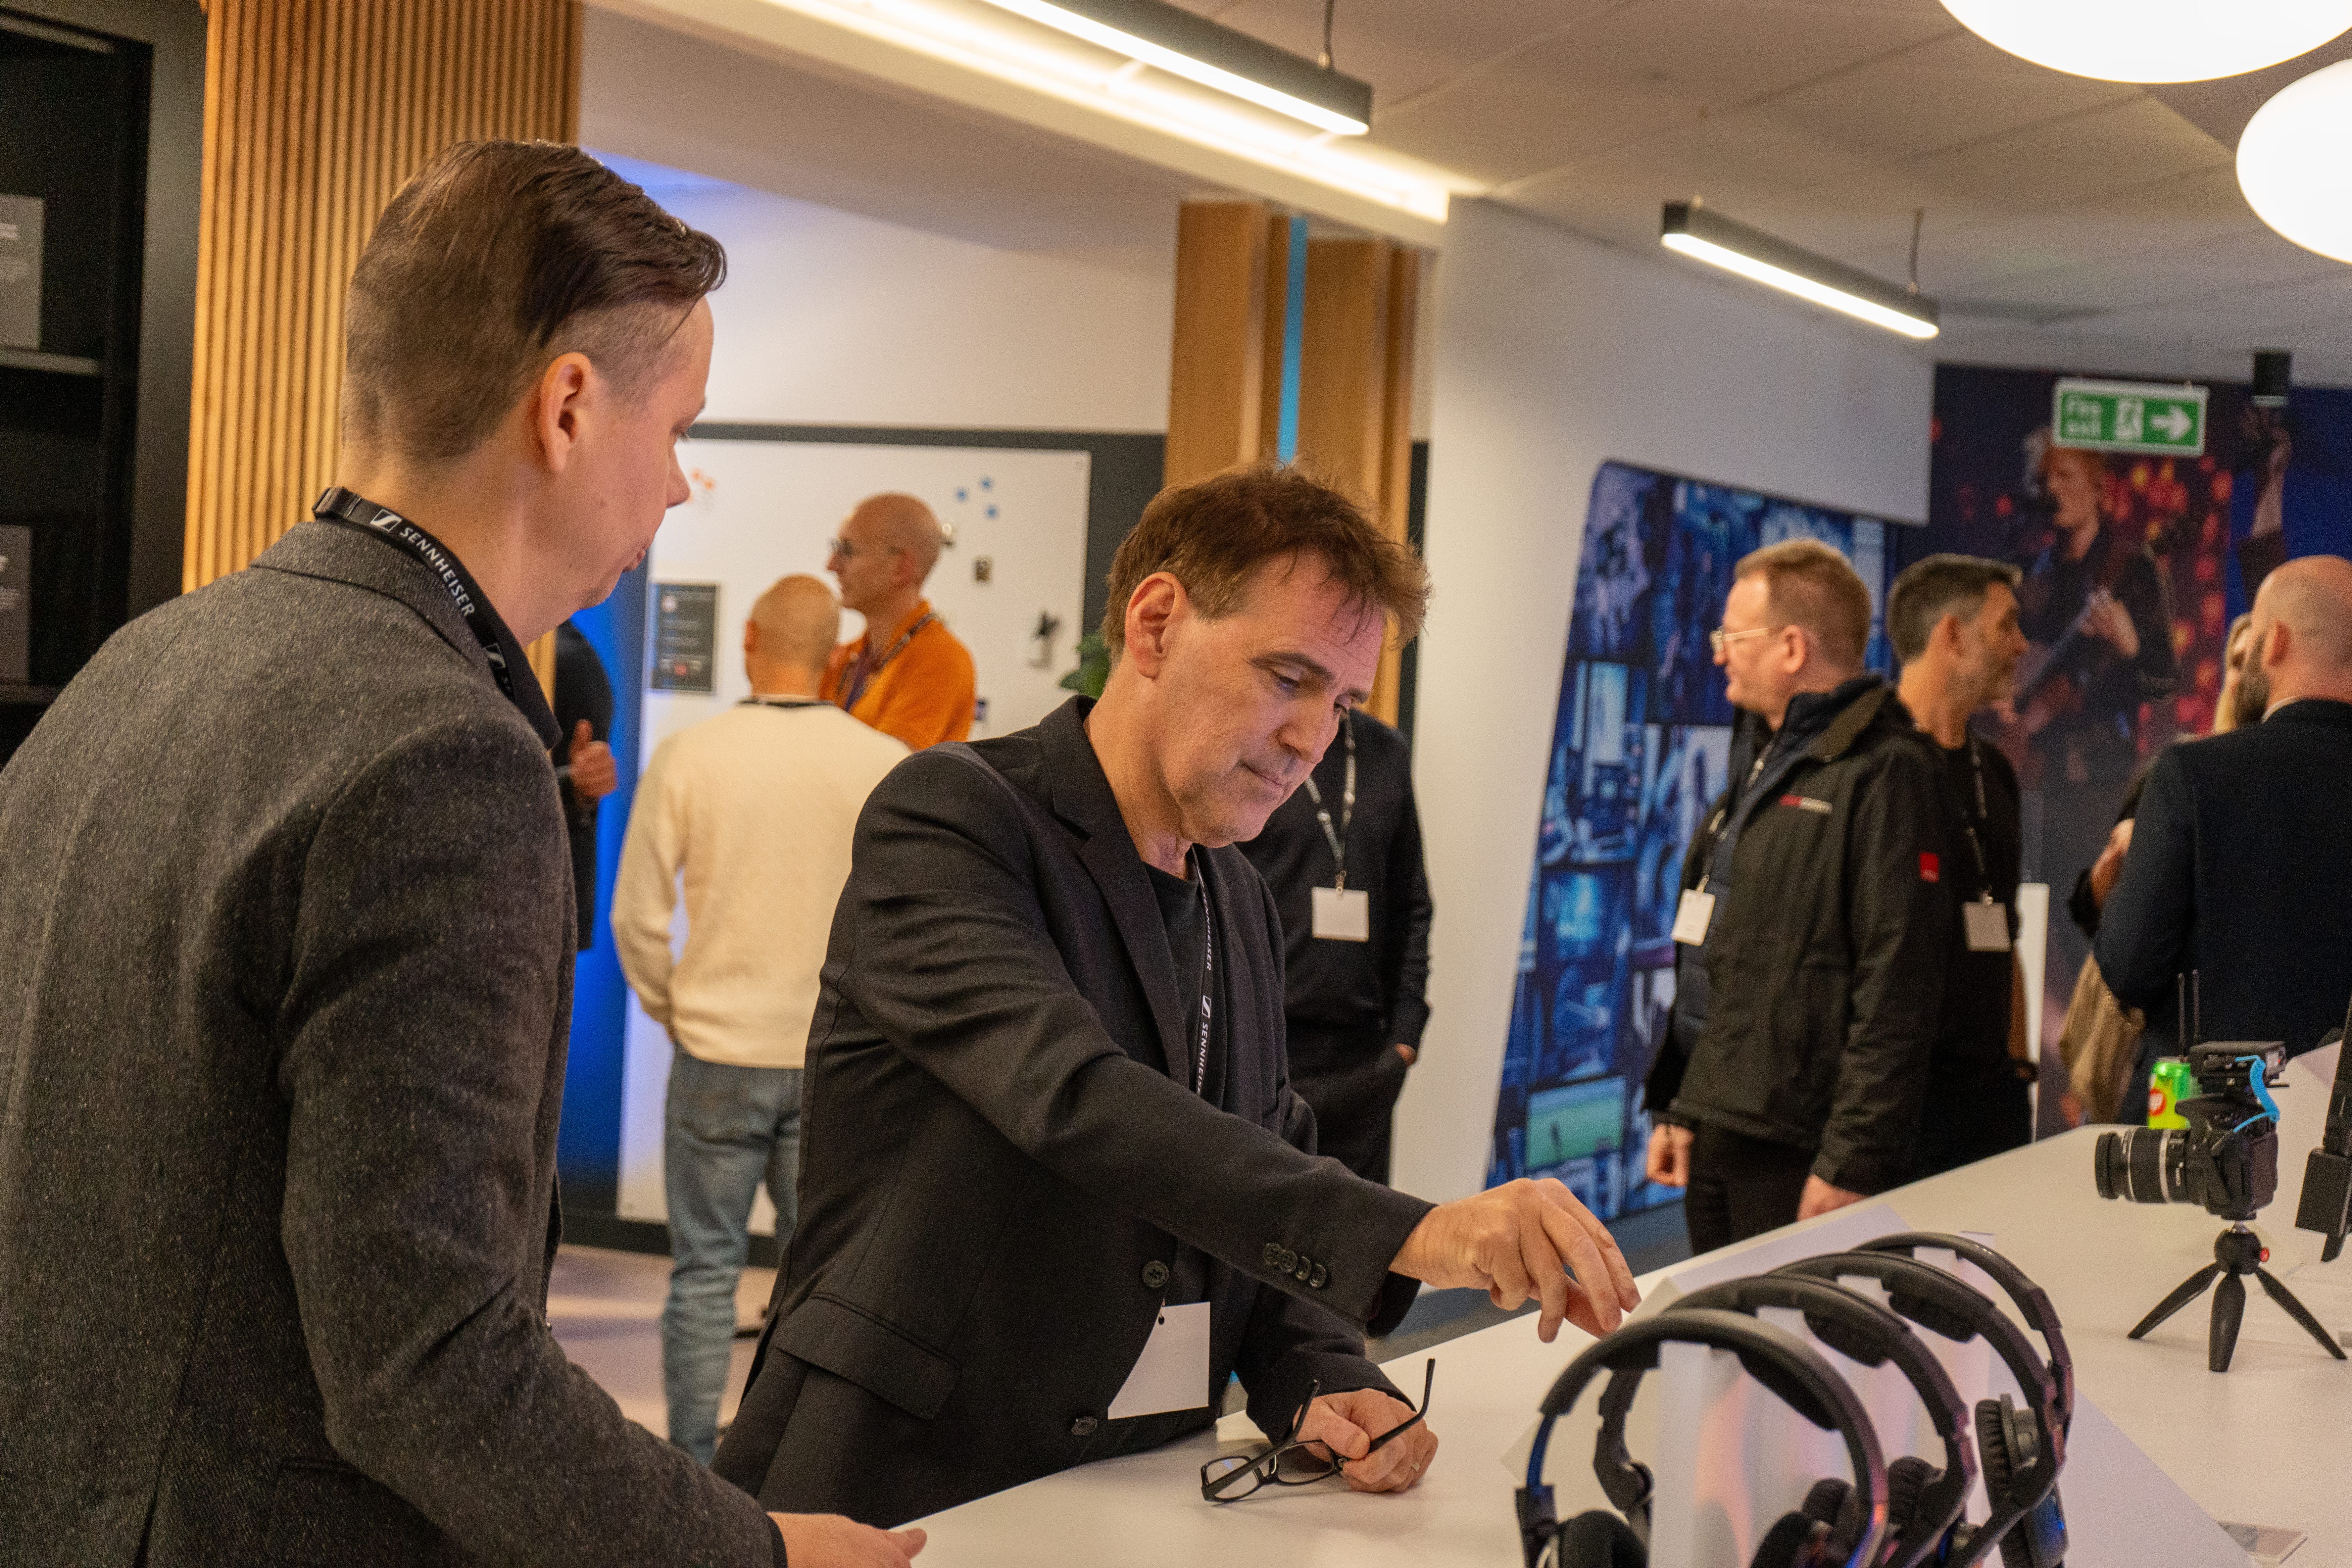 At the inaugural event, visitors were invited to experience the latest solutions from Sennheiser, Neumann, Merging Technologies, and DearReality